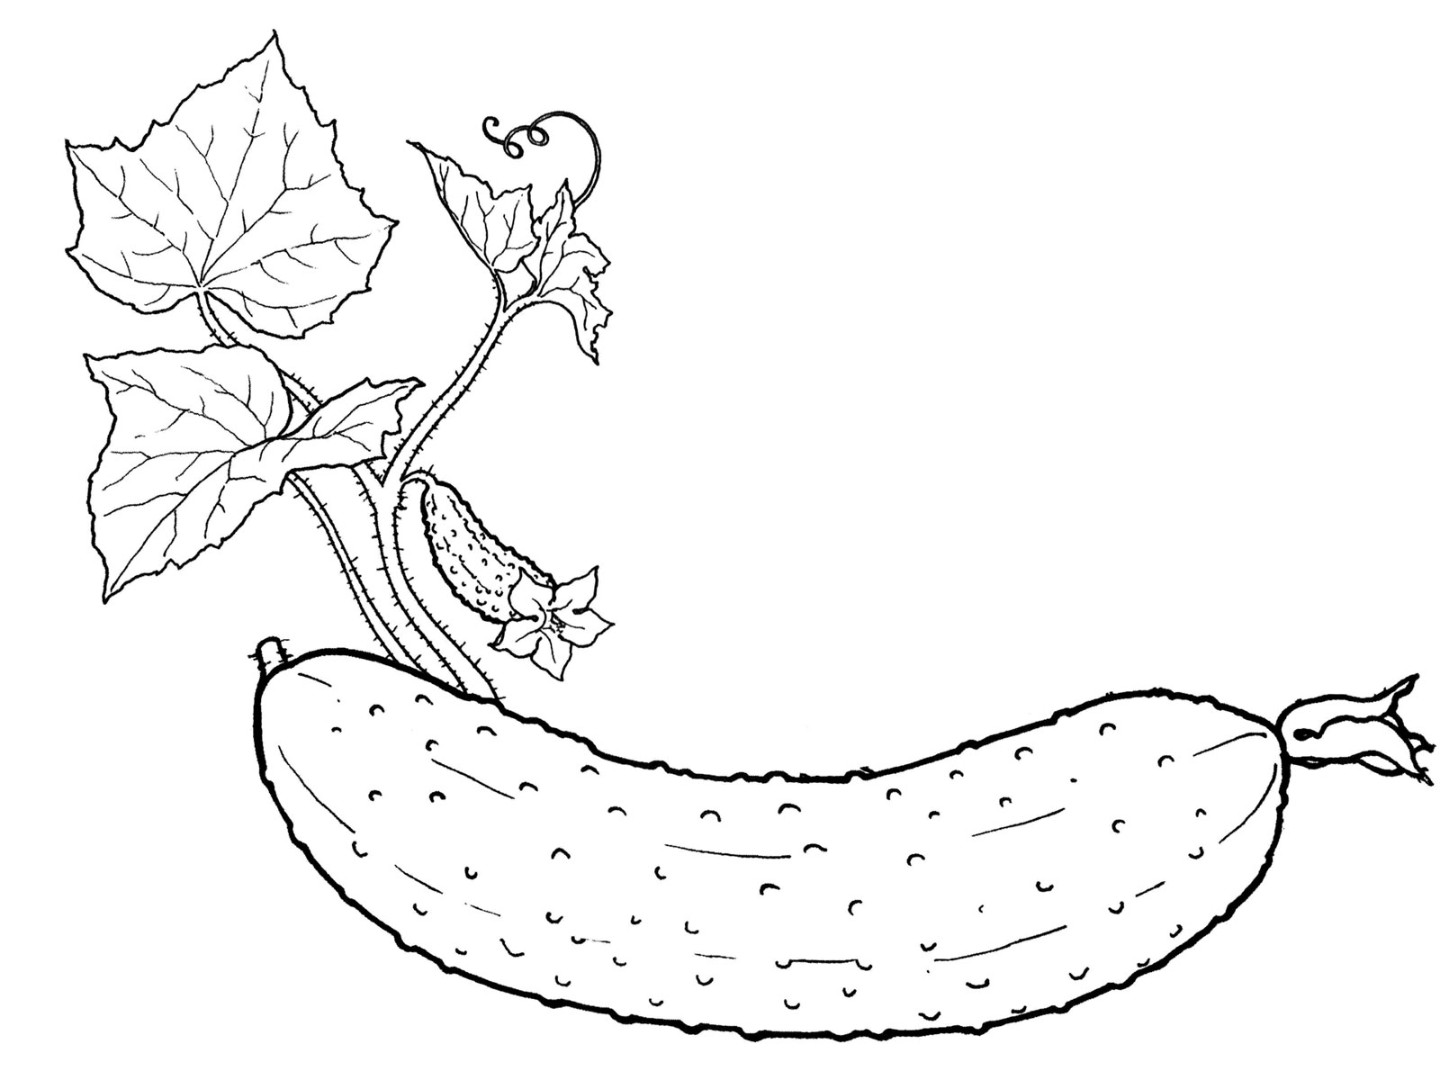 Cucumber coloring pages to download and print for free